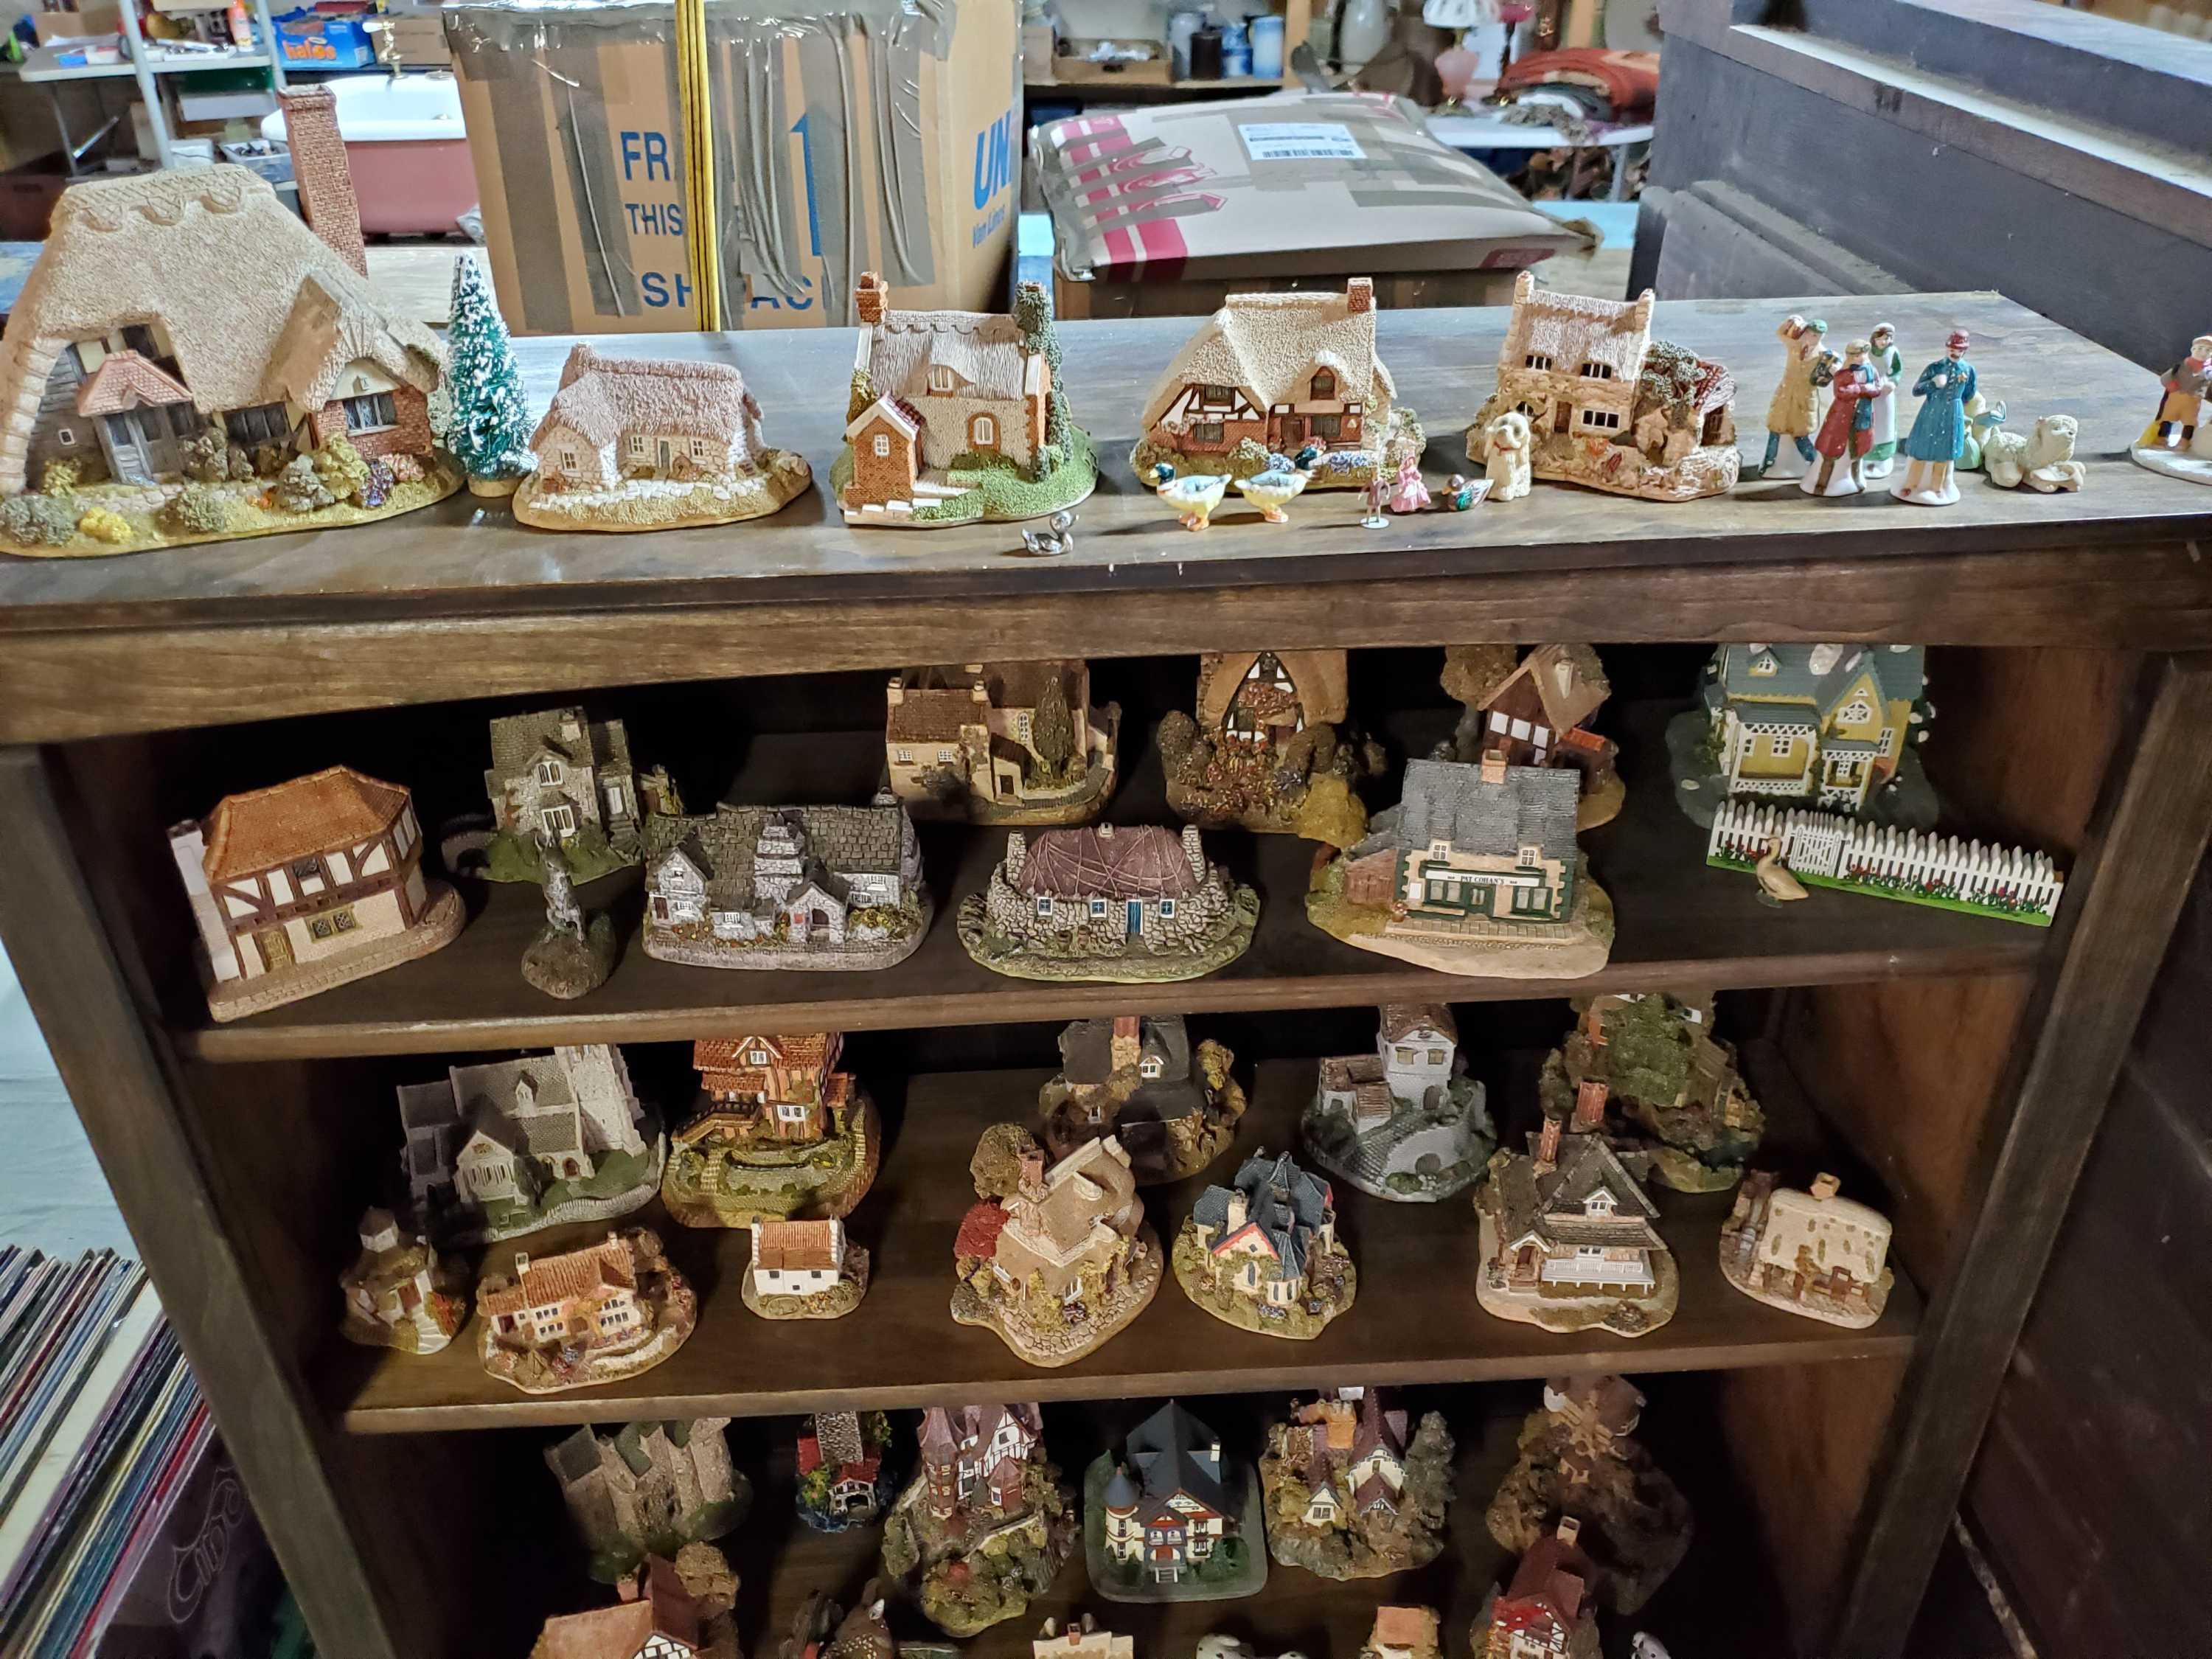 Bookself of LilliPut Lane Cottages, Animals and Related Figures